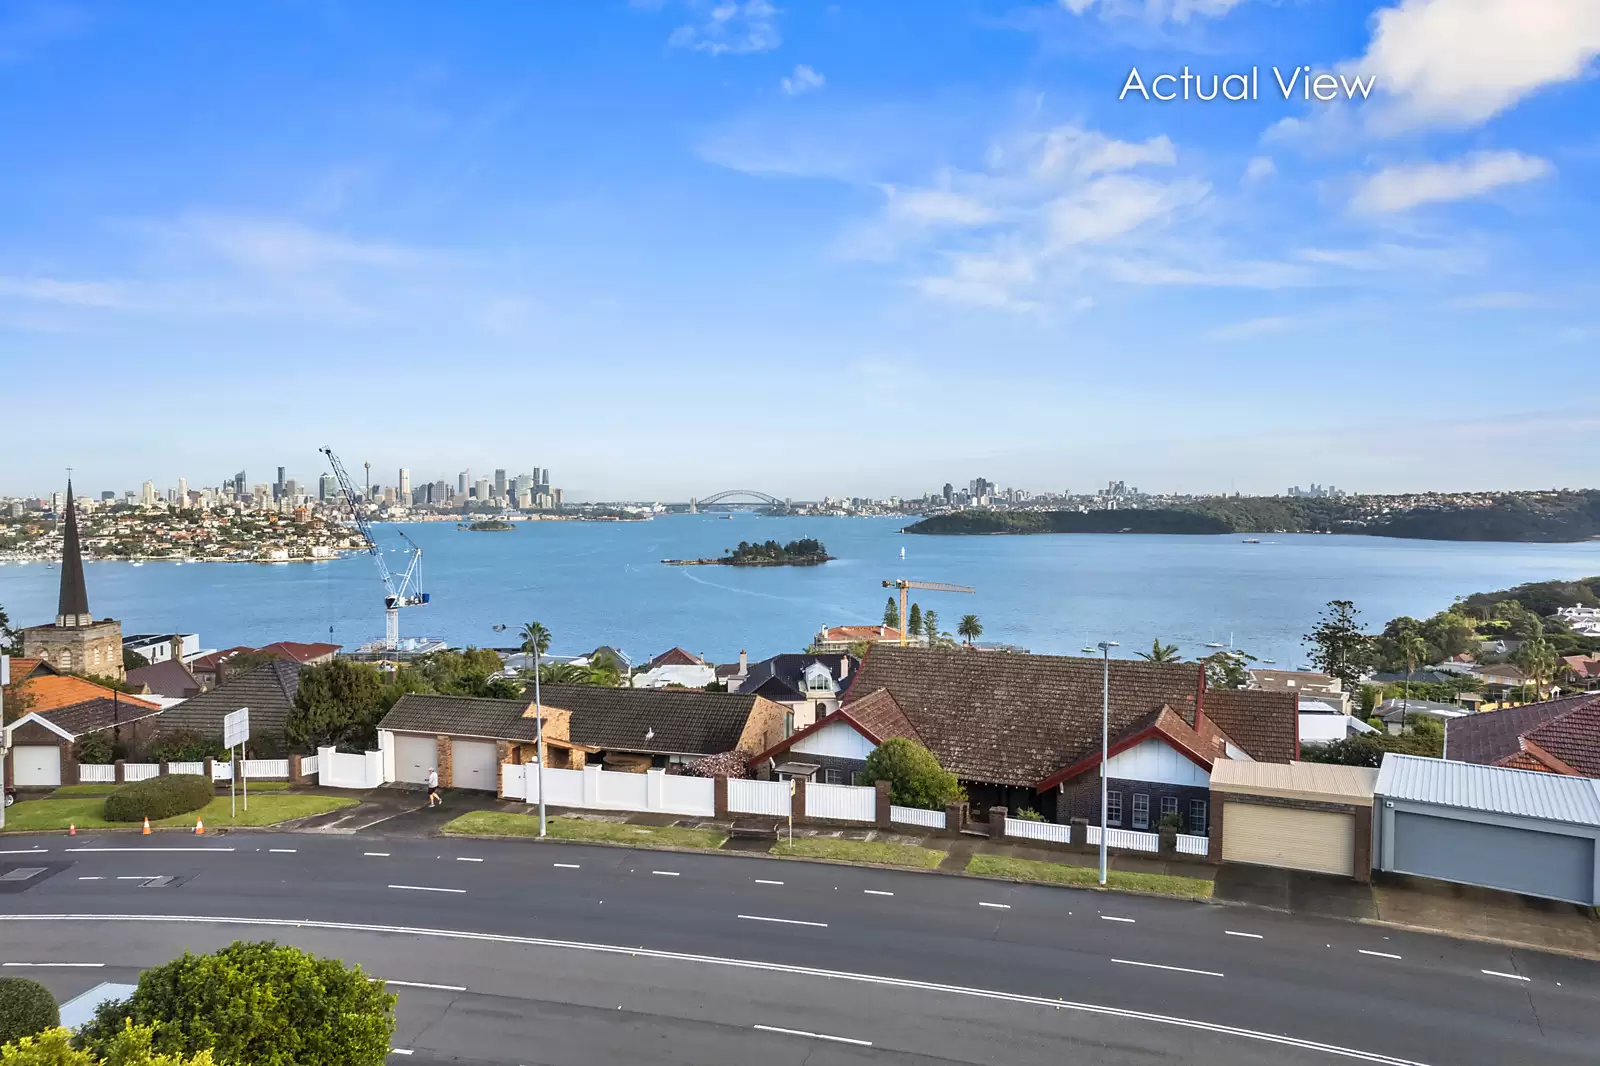 Photo #16: 31A New South Head Road, Vaucluse - For Sale by Sydney Sotheby's International Realty